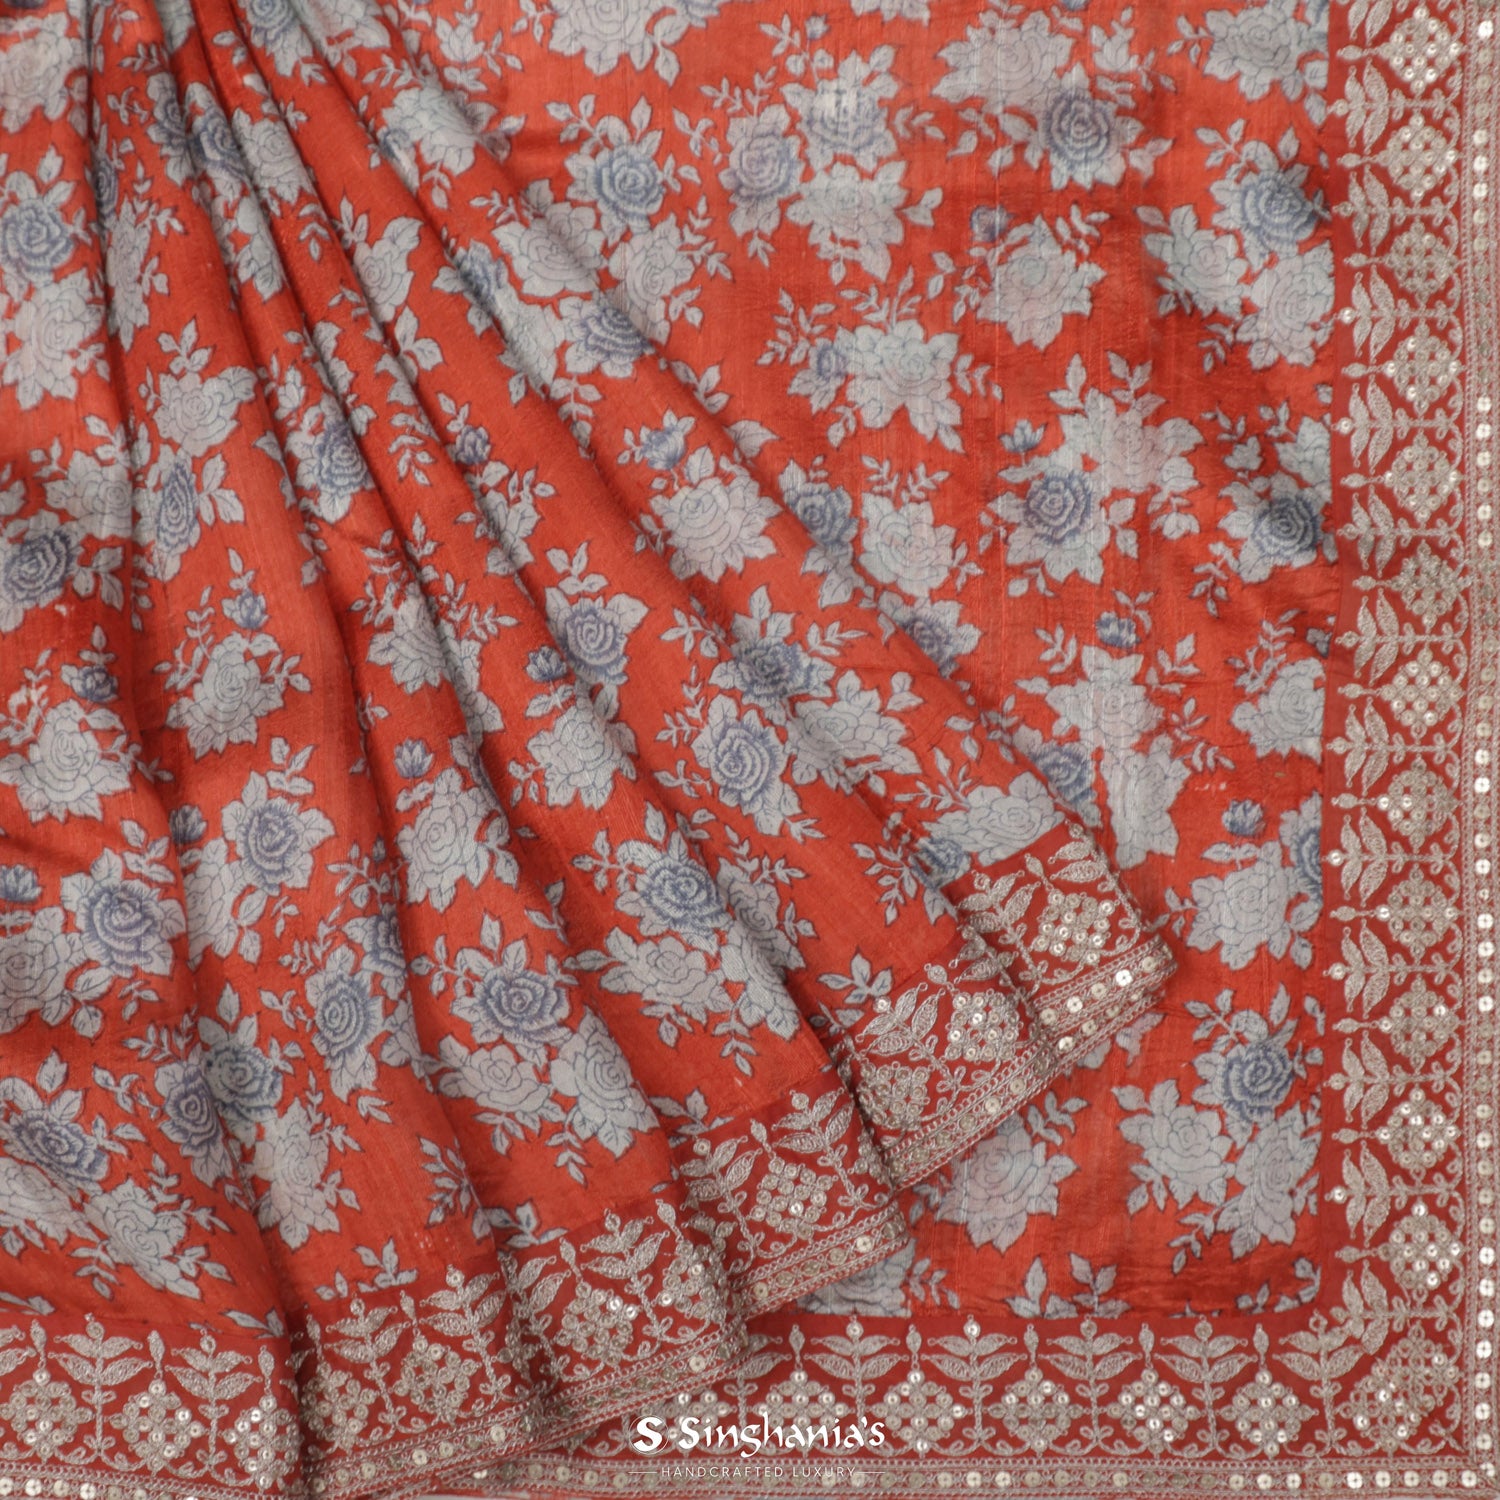 Outrageous Orange Printed Dupion Silk Saree With Floral Pattern